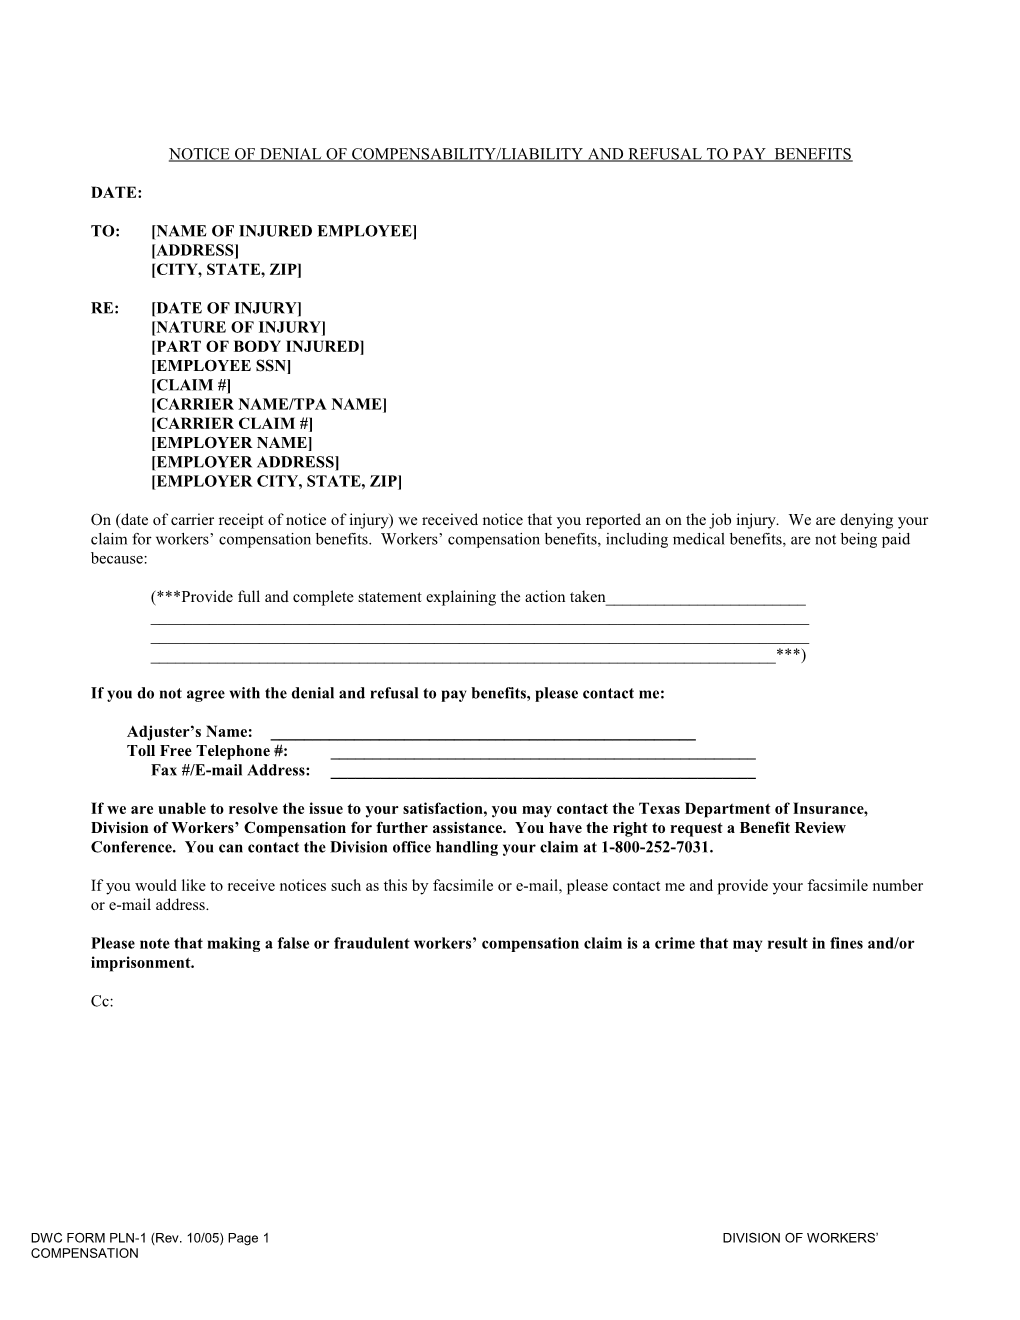 DWC FORM PLN-1 (Rev. 10/05) Page 2 DIVISION of WORKERS COMPENSATION